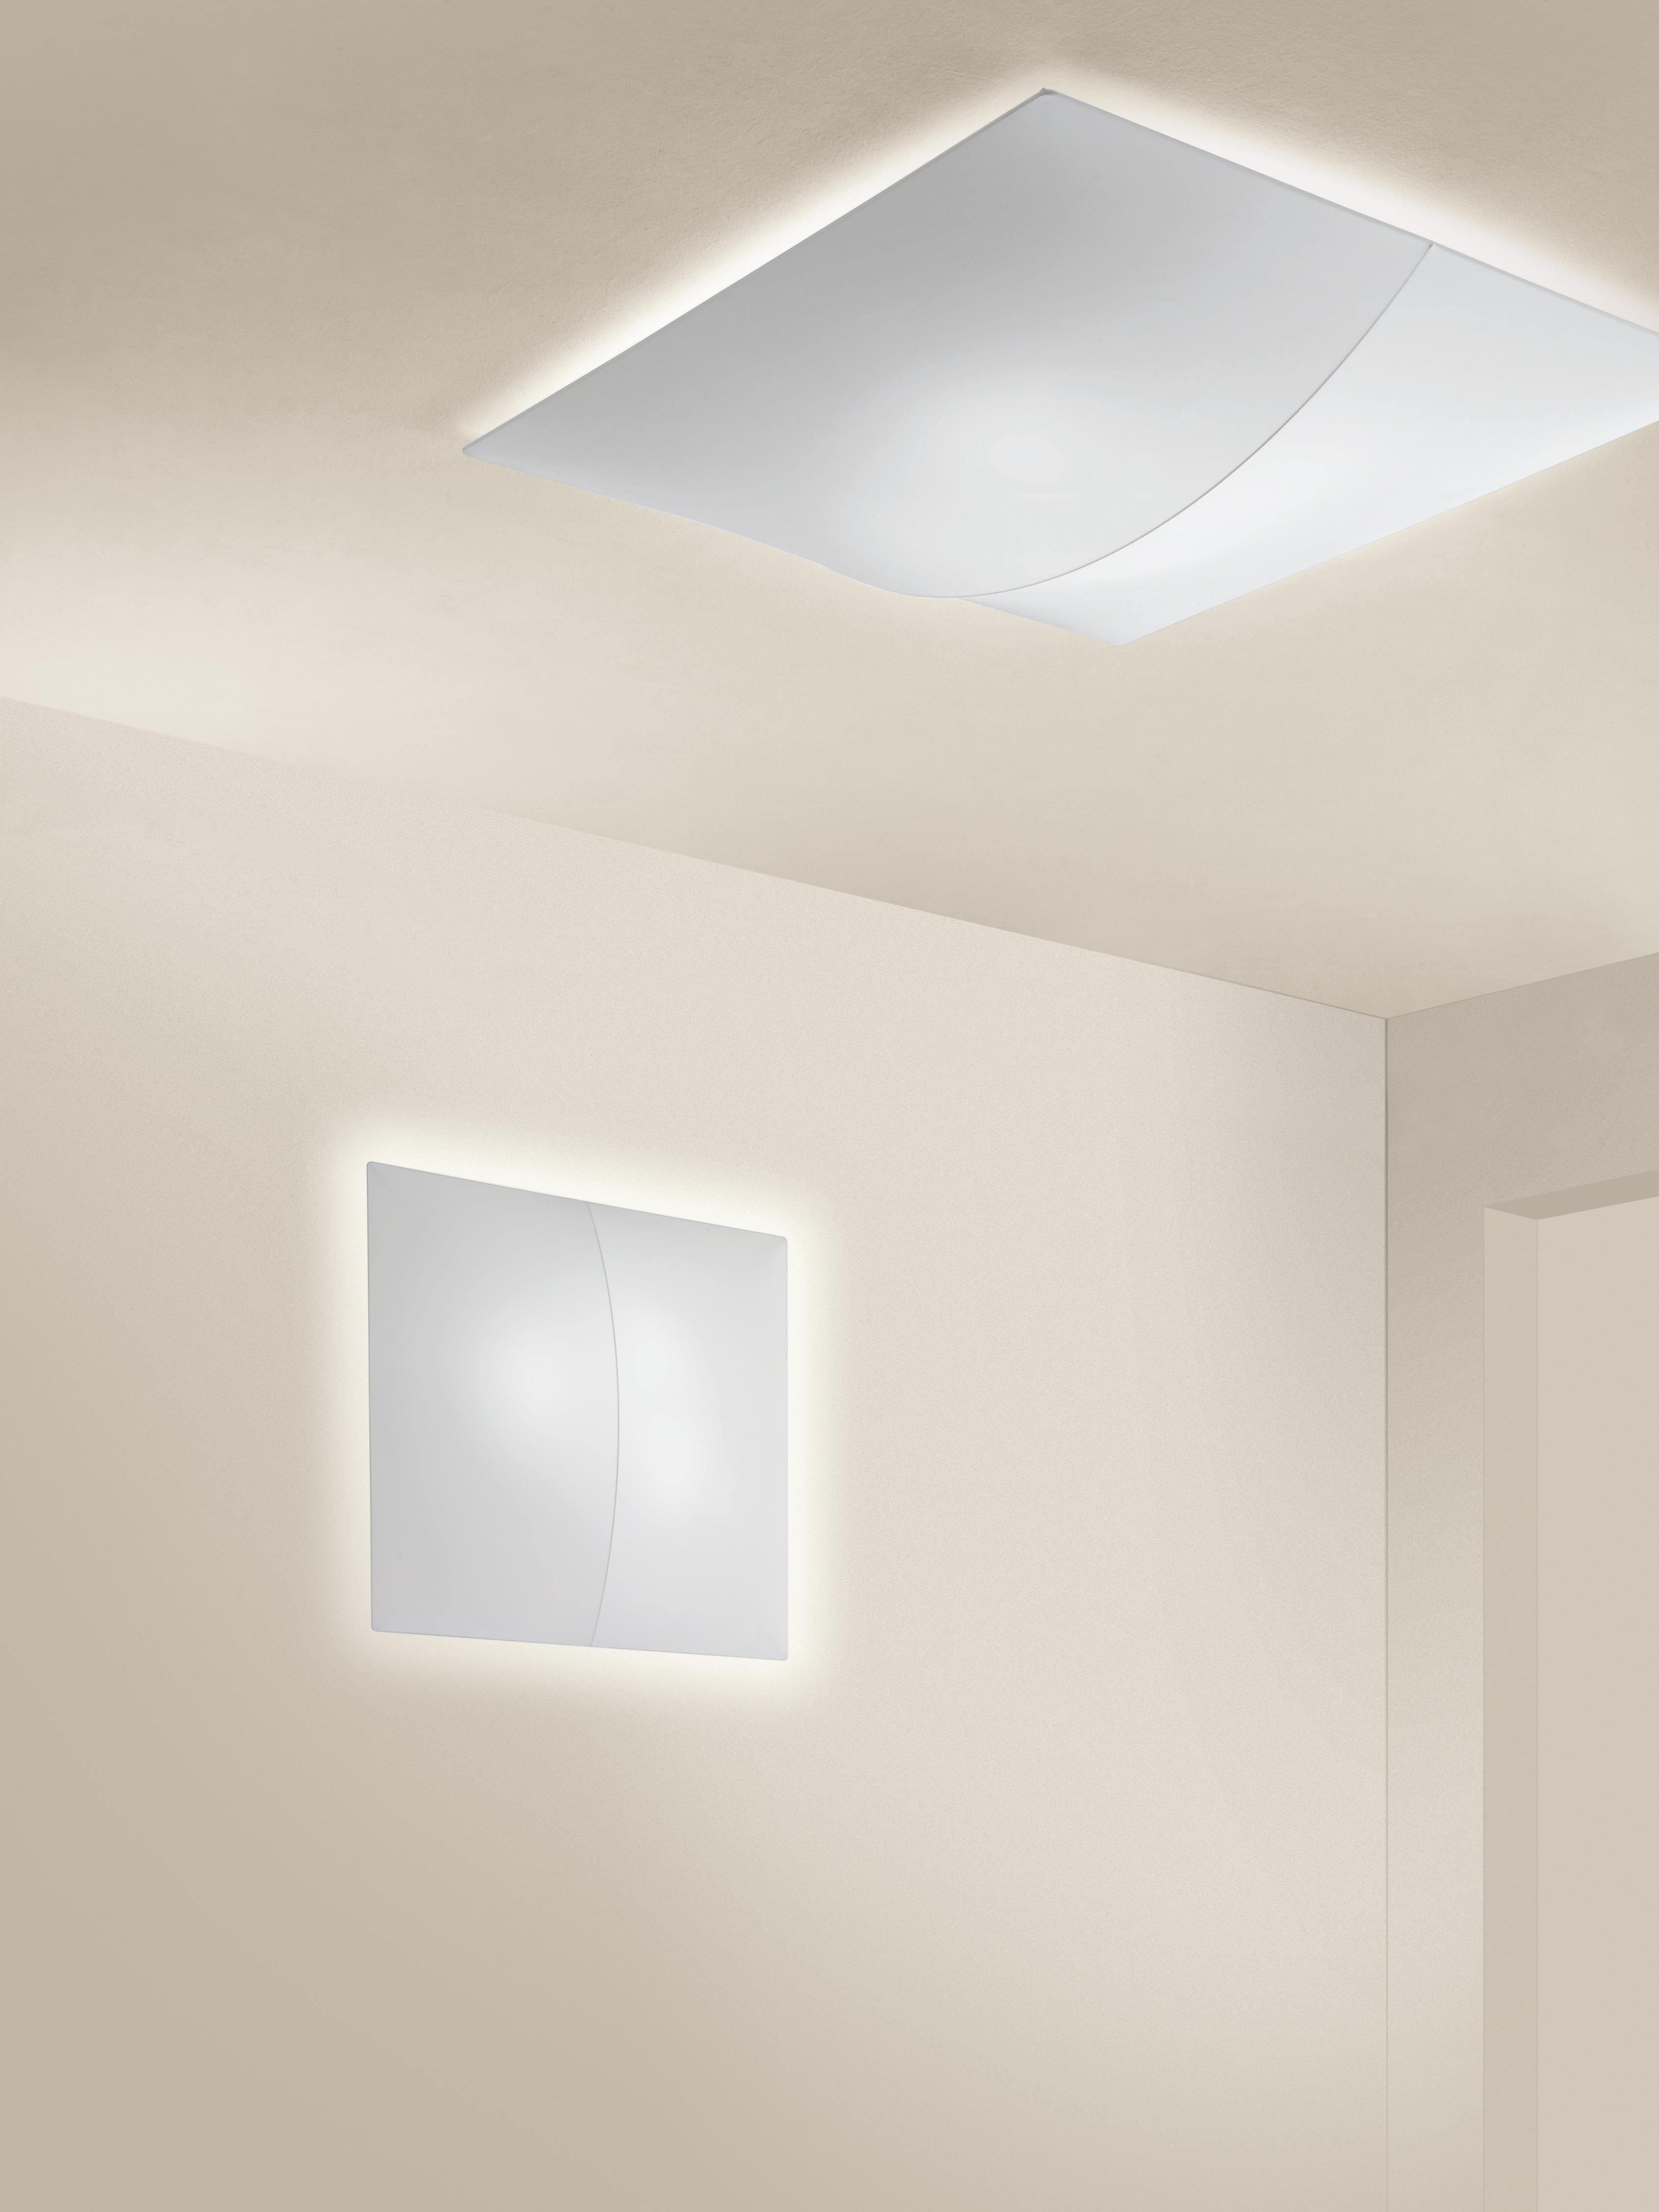 Axolight Medium 100 Nelly Wall Lamp in White Pattern by Manuel & Vanessa Vivian

Geometric simplicity and a discreet game of light and shade. Nelly is the purity of a white canvas interrupted by a linear trace that gently crosses it, emphasizing